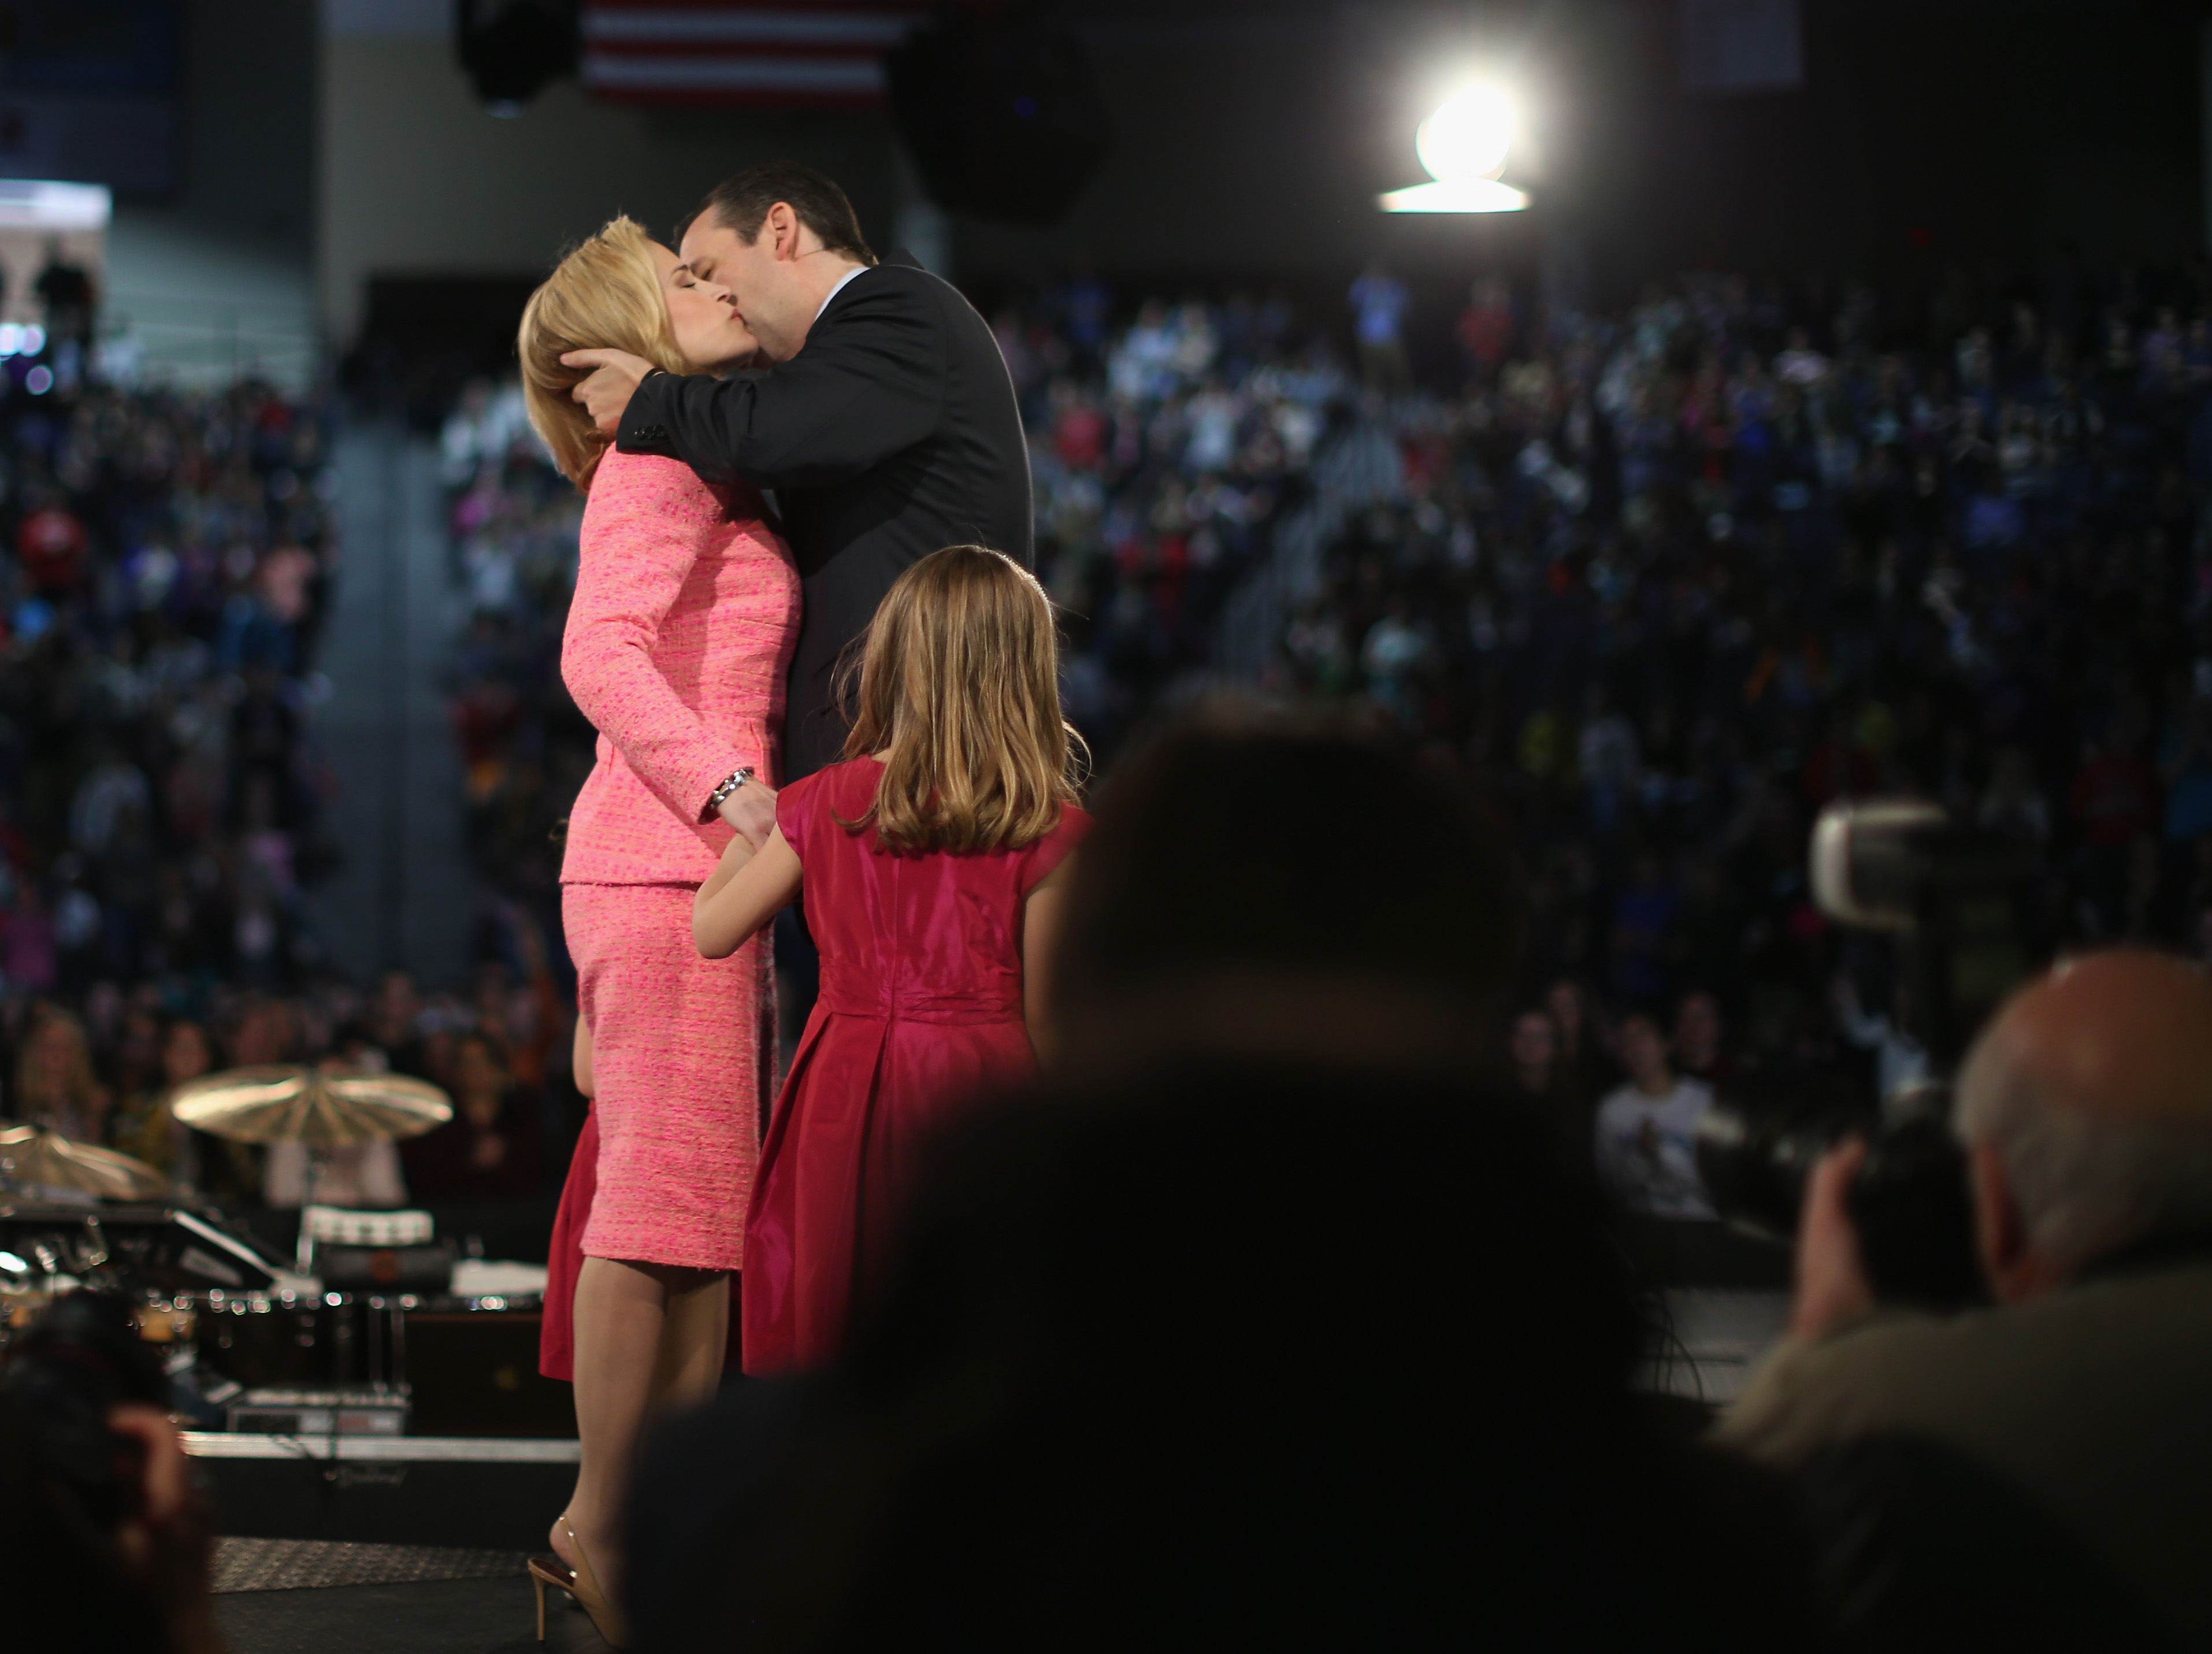 Sen. Ted Cruz (R-TX) (C) kisses his wife Heidi Cruz while standing with their daughter, six-year-old Caroline Cruz, after to speaking to a crowd gathered at Liberty University to announce his presidential candidacy March 23, 2015. (Getty)